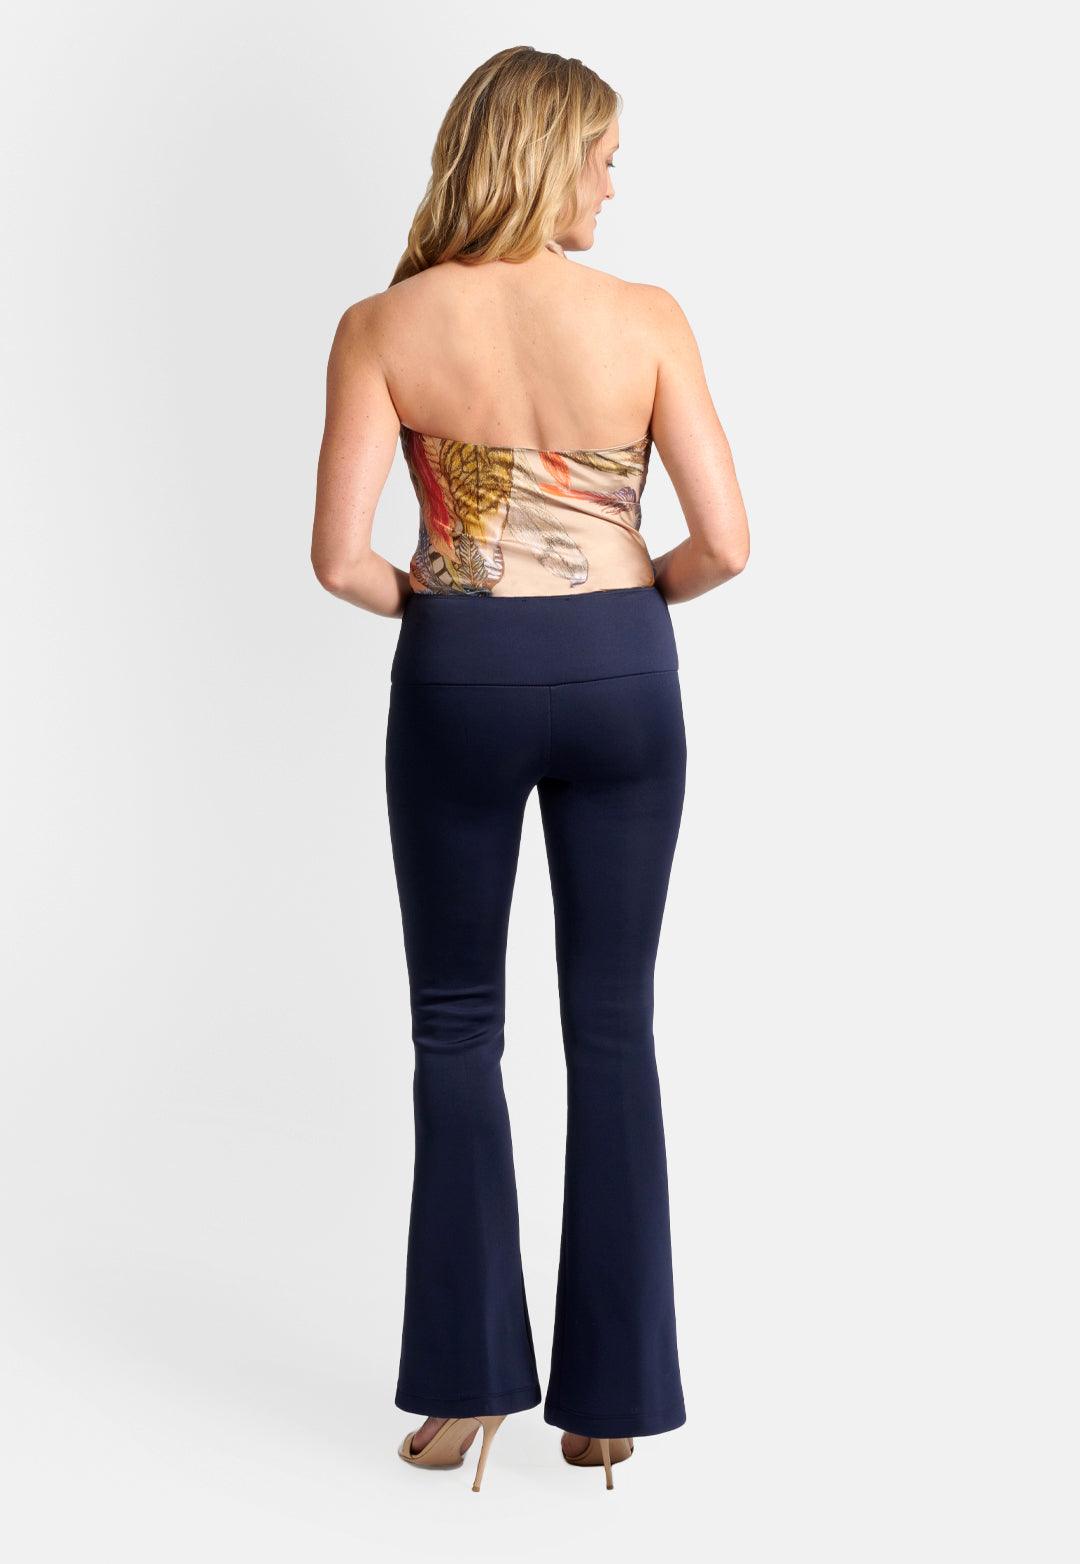 Model wearing silk beige feather printed halter top blouse and navy stretch knit pants